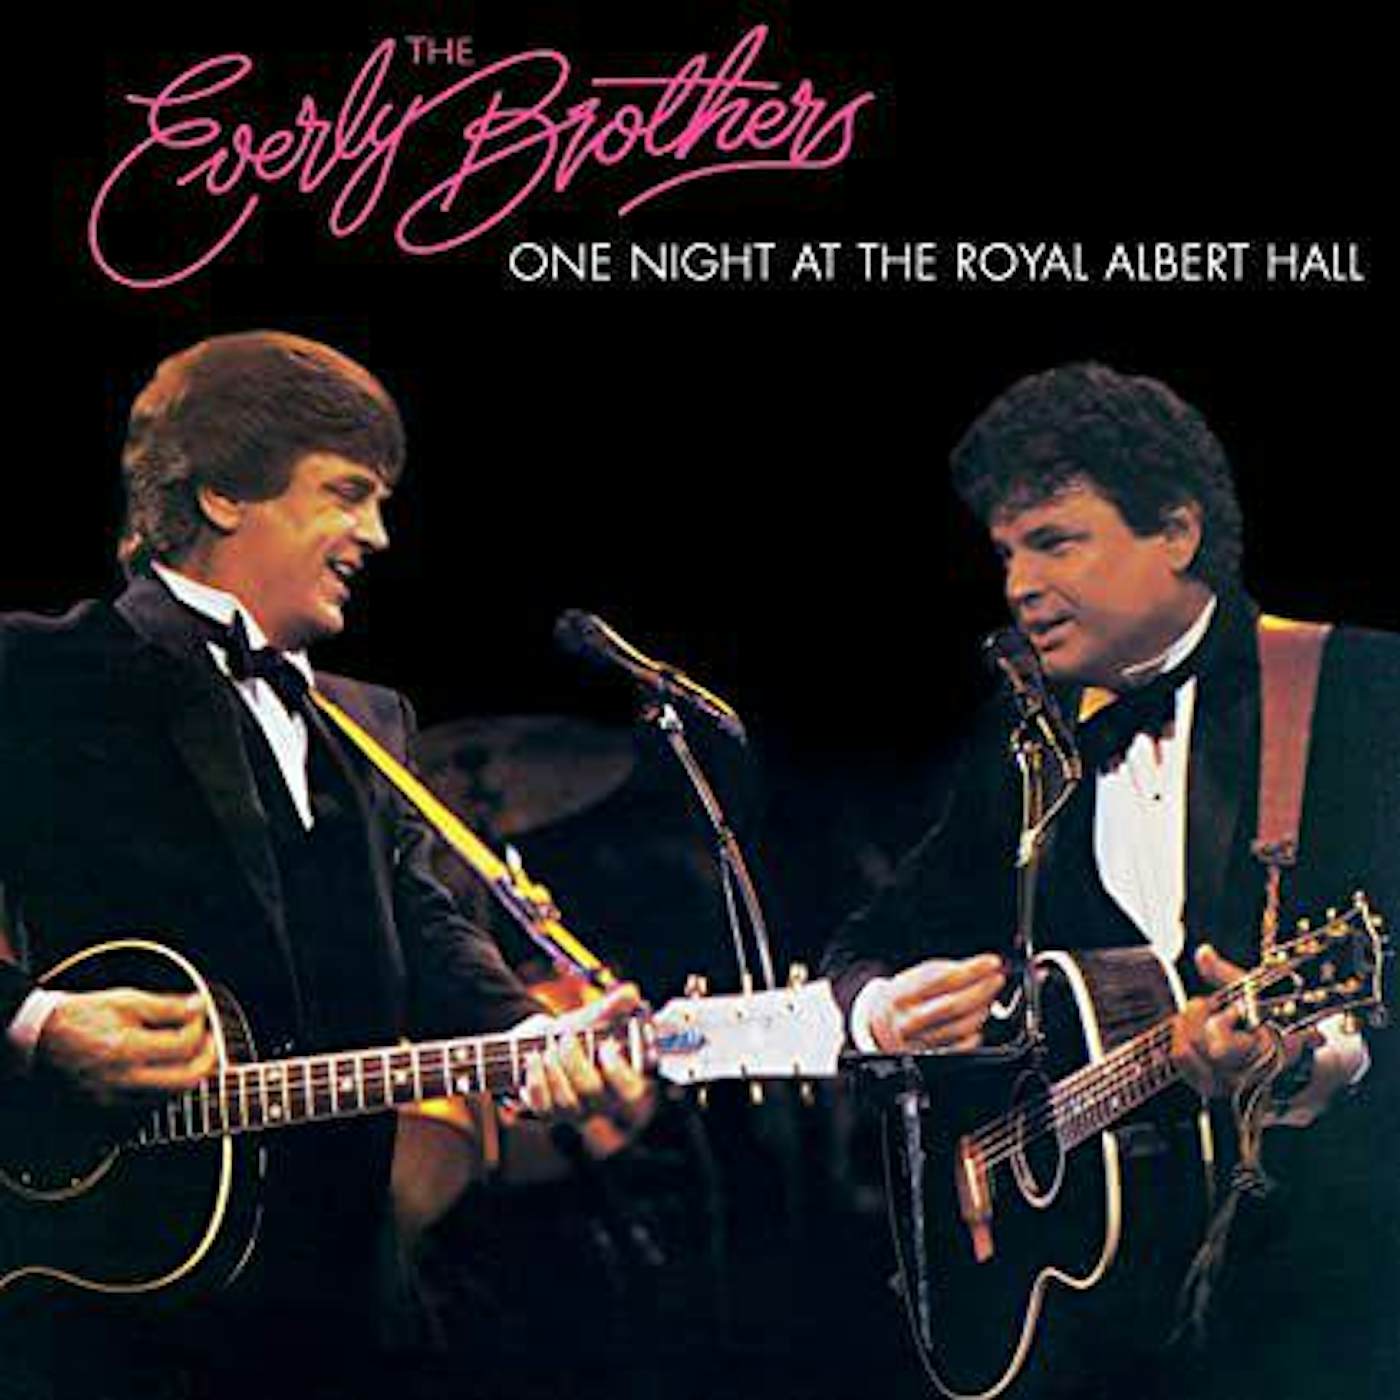 The Everly Brothers ONE NIGHT AT THE ROYAL ALBERT HALL (PINK) Vinyl Record